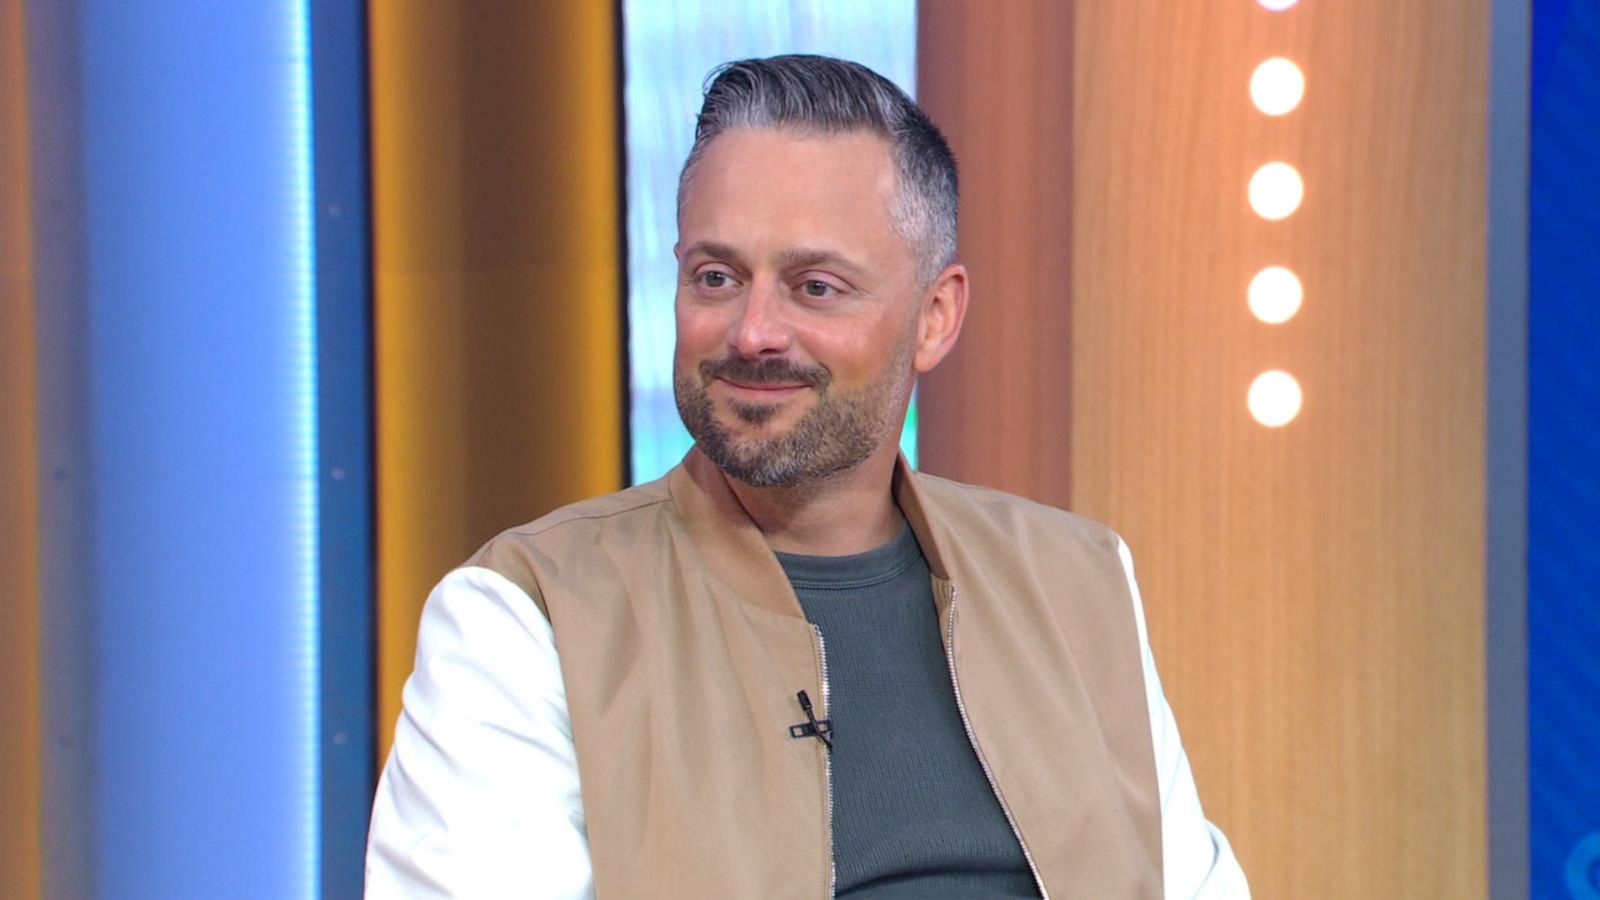 Nate Bargatze talks about his new comedy special - Good Morning America